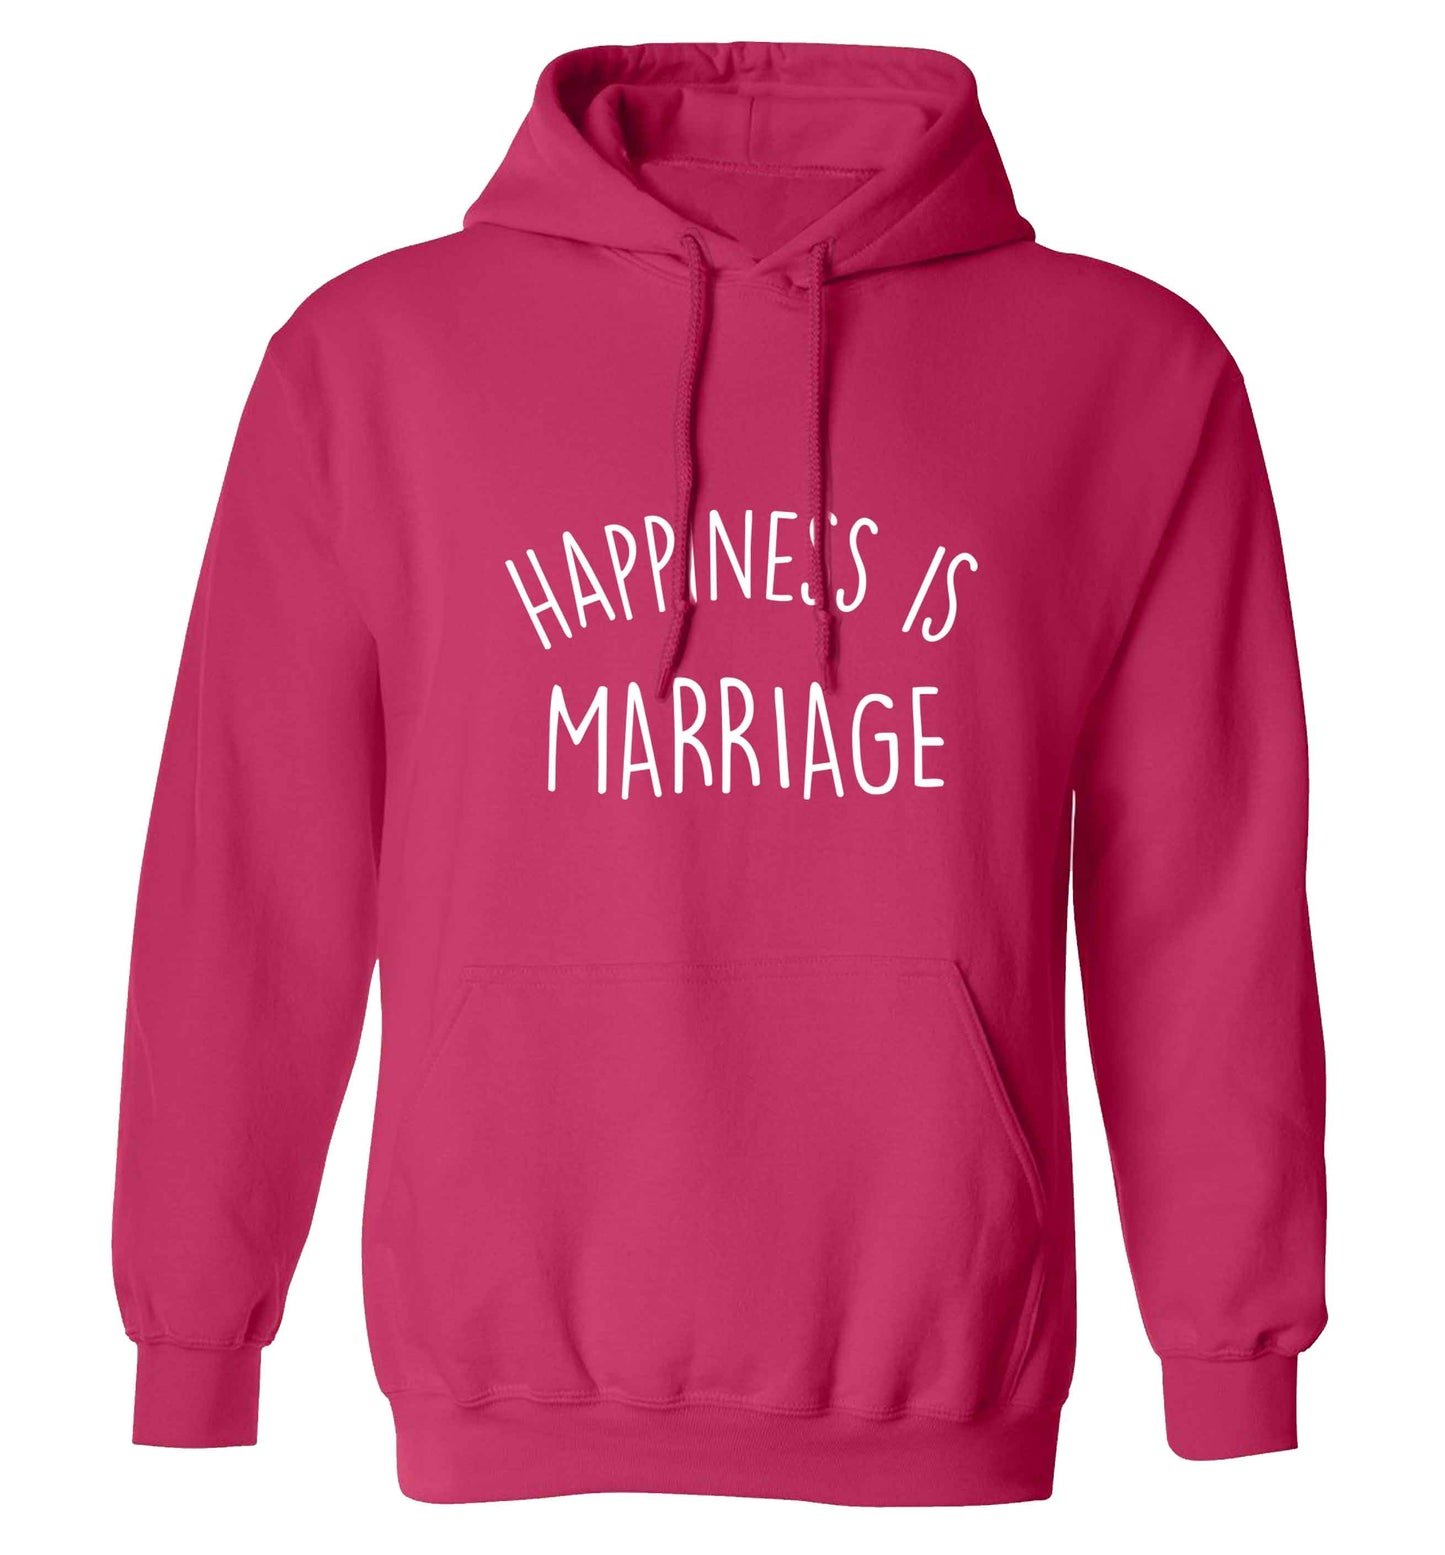 Happiness is wedding planning adults unisex pink hoodie 2XL